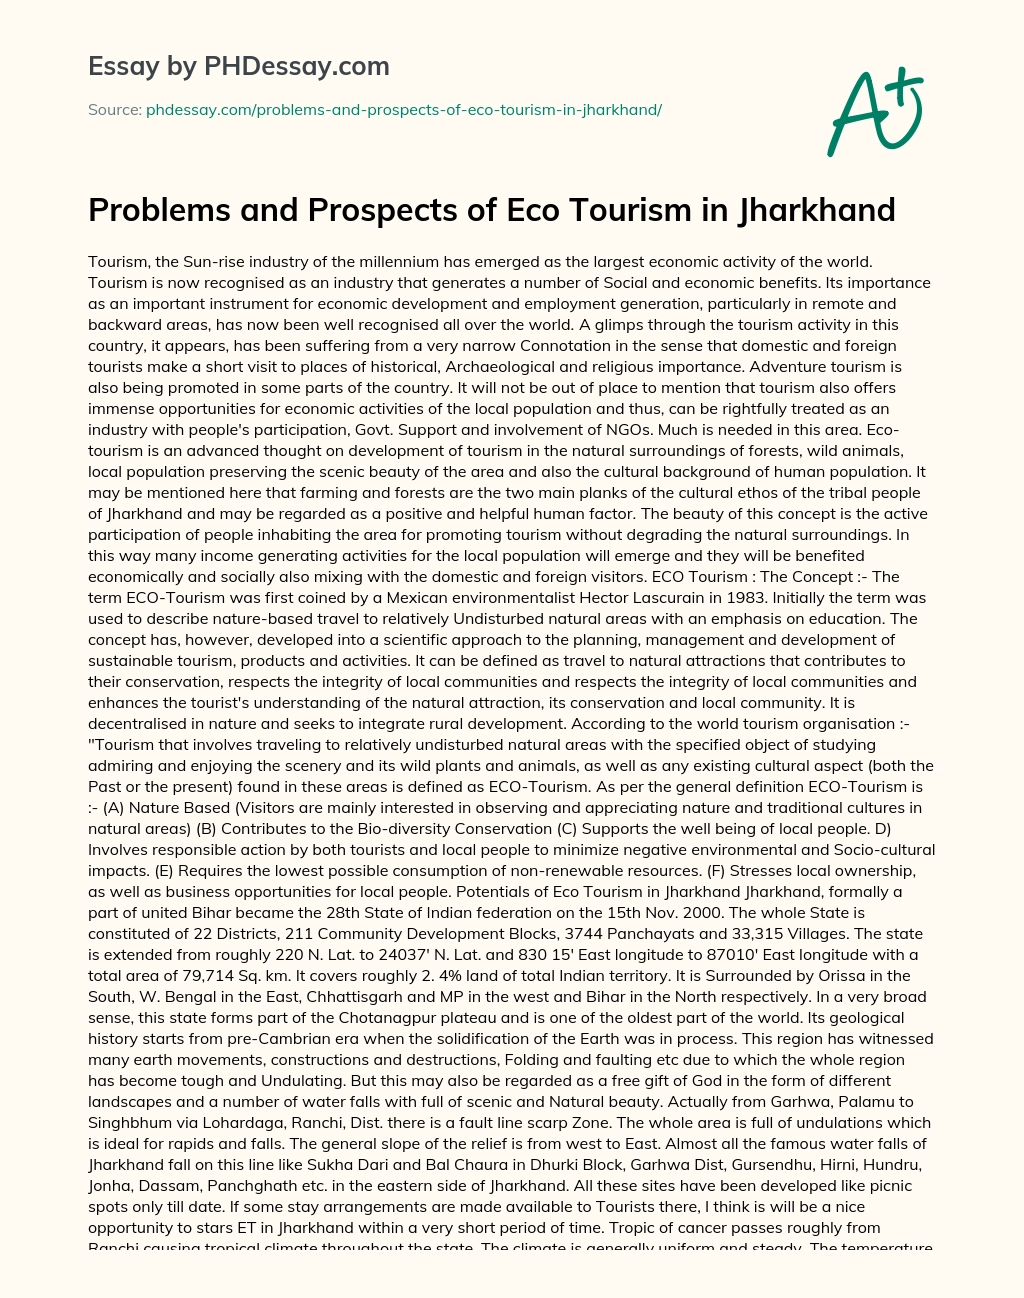 Problems and Prospects of Eco Tourism in Jharkhand essay